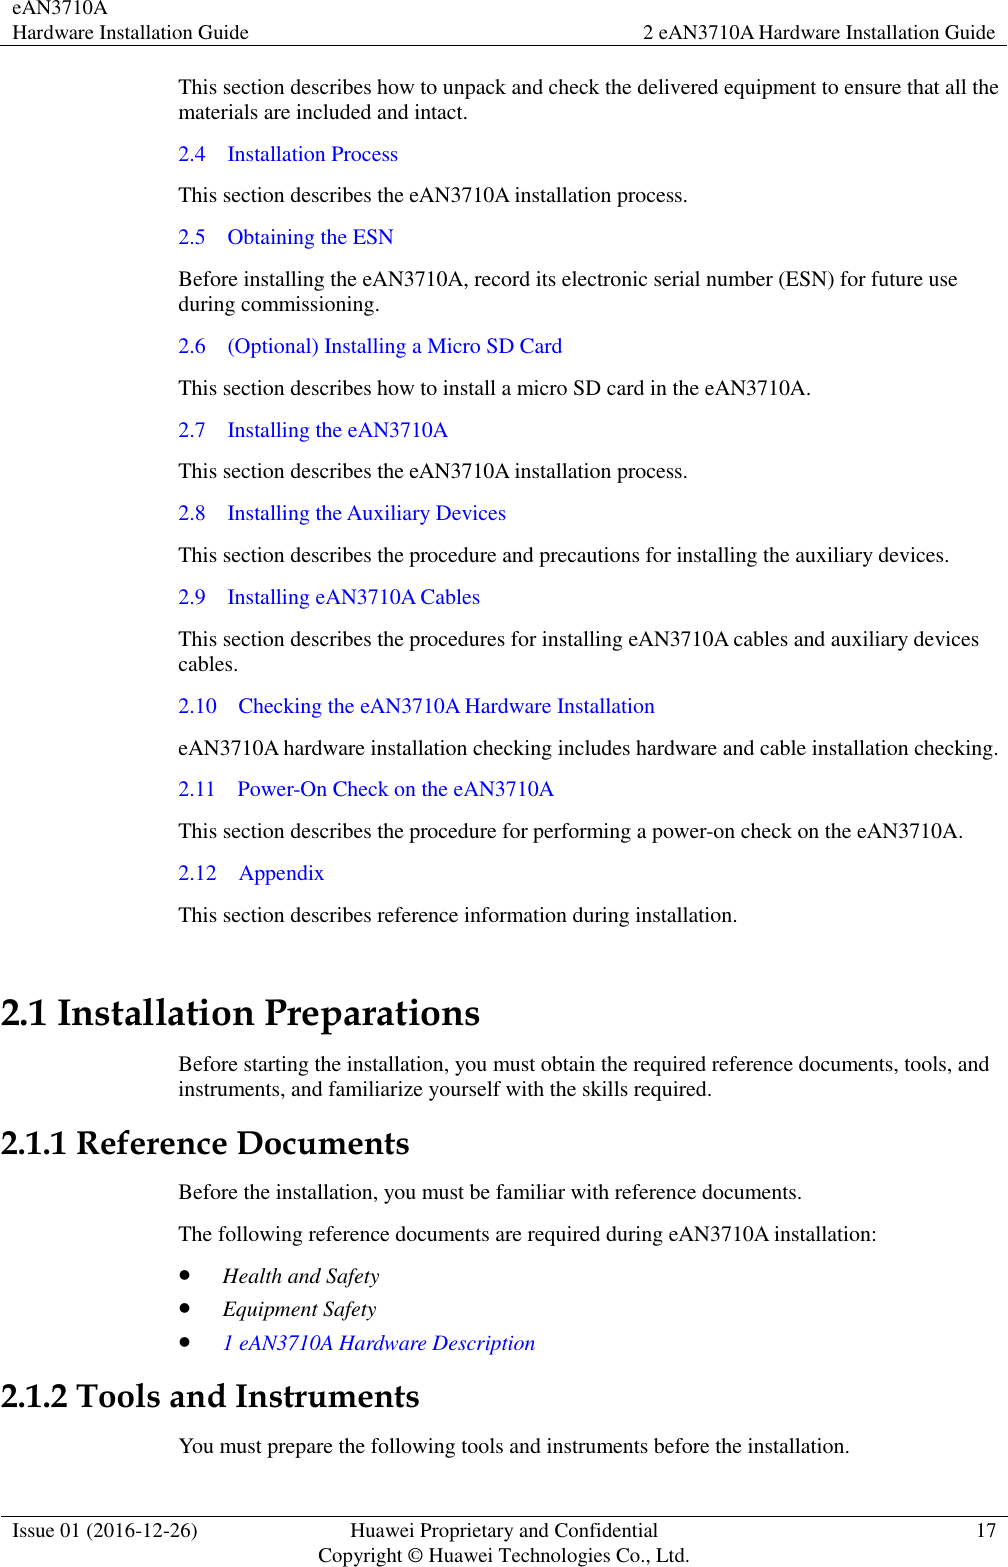 eAN3710A Hardware Installation Guide 2 eAN3710A Hardware Installation Guide  Issue 01 (2016-12-26) Huawei Proprietary and Confidential                                     Copyright © Huawei Technologies Co., Ltd. 17  This section describes how to unpack and check the delivered equipment to ensure that all the materials are included and intact. 2.4    Installation Process This section describes the eAN3710A installation process.   2.5    Obtaining the ESN Before installing the eAN3710A, record its electronic serial number (ESN) for future use during commissioning. 2.6    (Optional) Installing a Micro SD Card This section describes how to install a micro SD card in the eAN3710A. 2.7    Installing the eAN3710A This section describes the eAN3710A installation process. 2.8    Installing the Auxiliary Devices This section describes the procedure and precautions for installing the auxiliary devices. 2.9    Installing eAN3710A Cables This section describes the procedures for installing eAN3710A cables and auxiliary devices cables. 2.10    Checking the eAN3710A Hardware Installation eAN3710A hardware installation checking includes hardware and cable installation checking.   2.11    Power-On Check on the eAN3710A This section describes the procedure for performing a power-on check on the eAN3710A. 2.12    Appendix This section describes reference information during installation.   2.1 Installation Preparations Before starting the installation, you must obtain the required reference documents, tools, and instruments, and familiarize yourself with the skills required. 2.1.1 Reference Documents Before the installation, you must be familiar with reference documents. The following reference documents are required during eAN3710A installation:  Health and Safety  Equipment Safety  1 eAN3710A Hardware Description 2.1.2 Tools and Instruments You must prepare the following tools and instruments before the installation. 